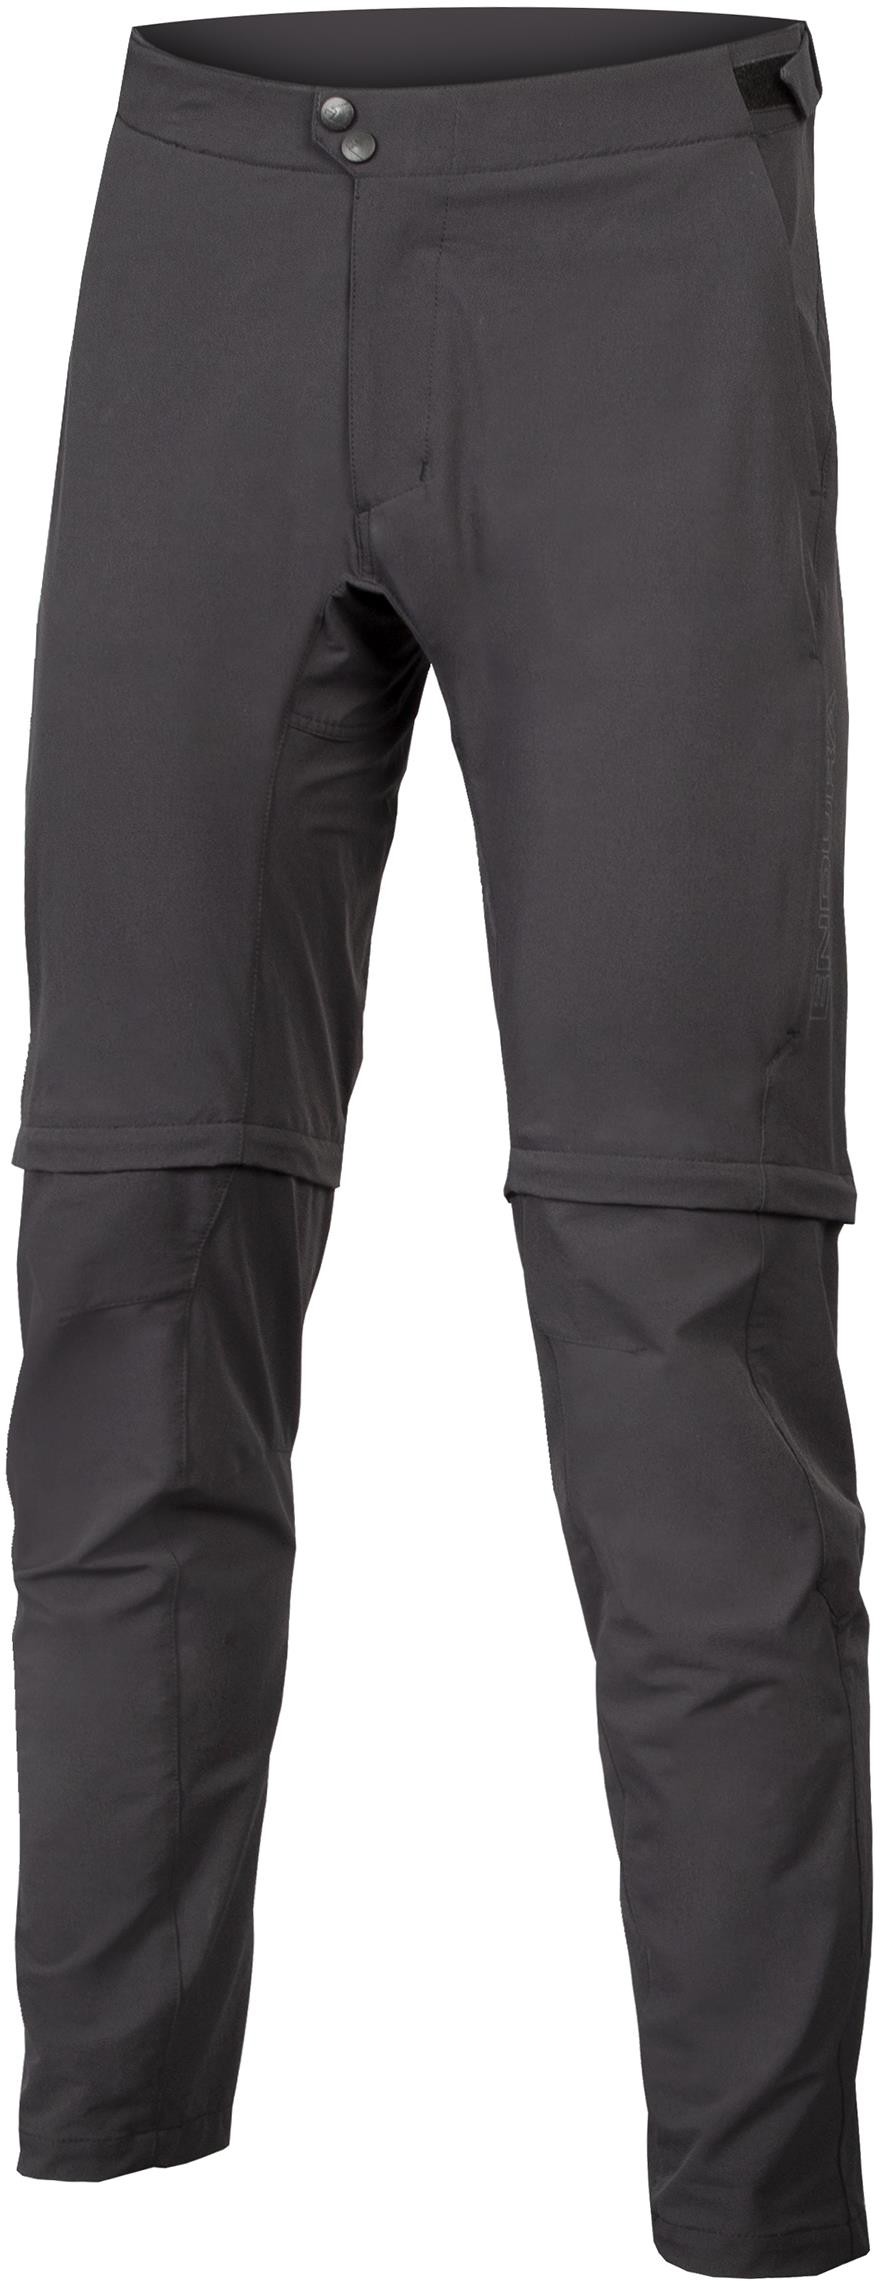 GV500 Zip-off Trousers image 0